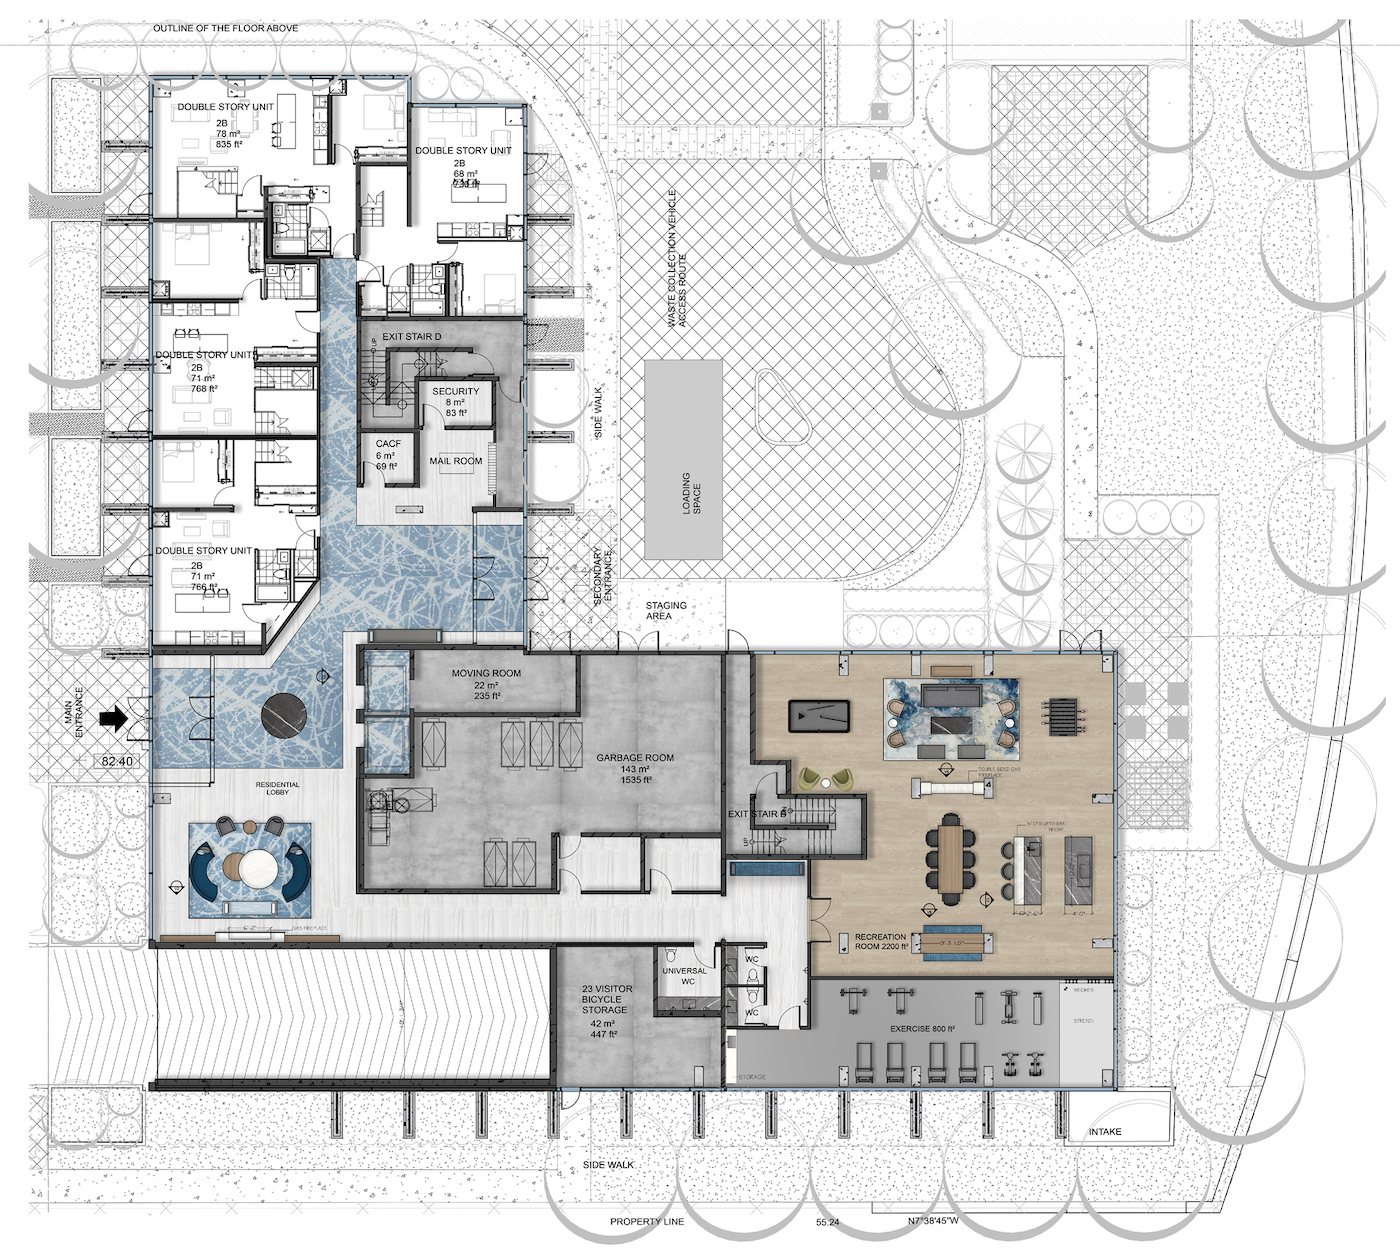 Amenities Map of Rise at Stride Condos